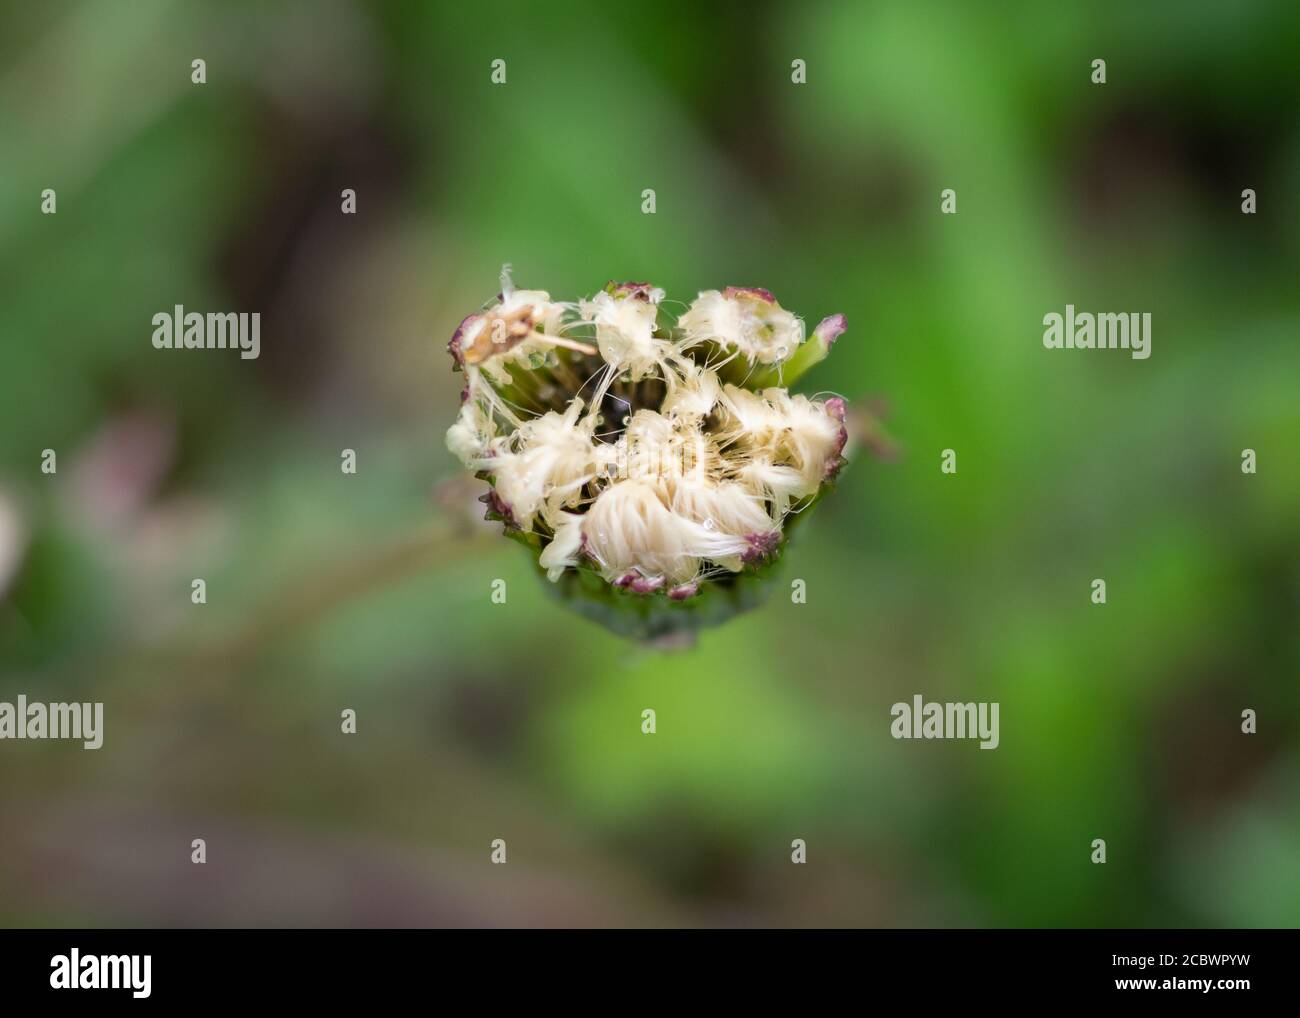 Stem of the wild officinal plant of the dandelion, closed flower with seeds with the typical umbrella shape Stock Photo